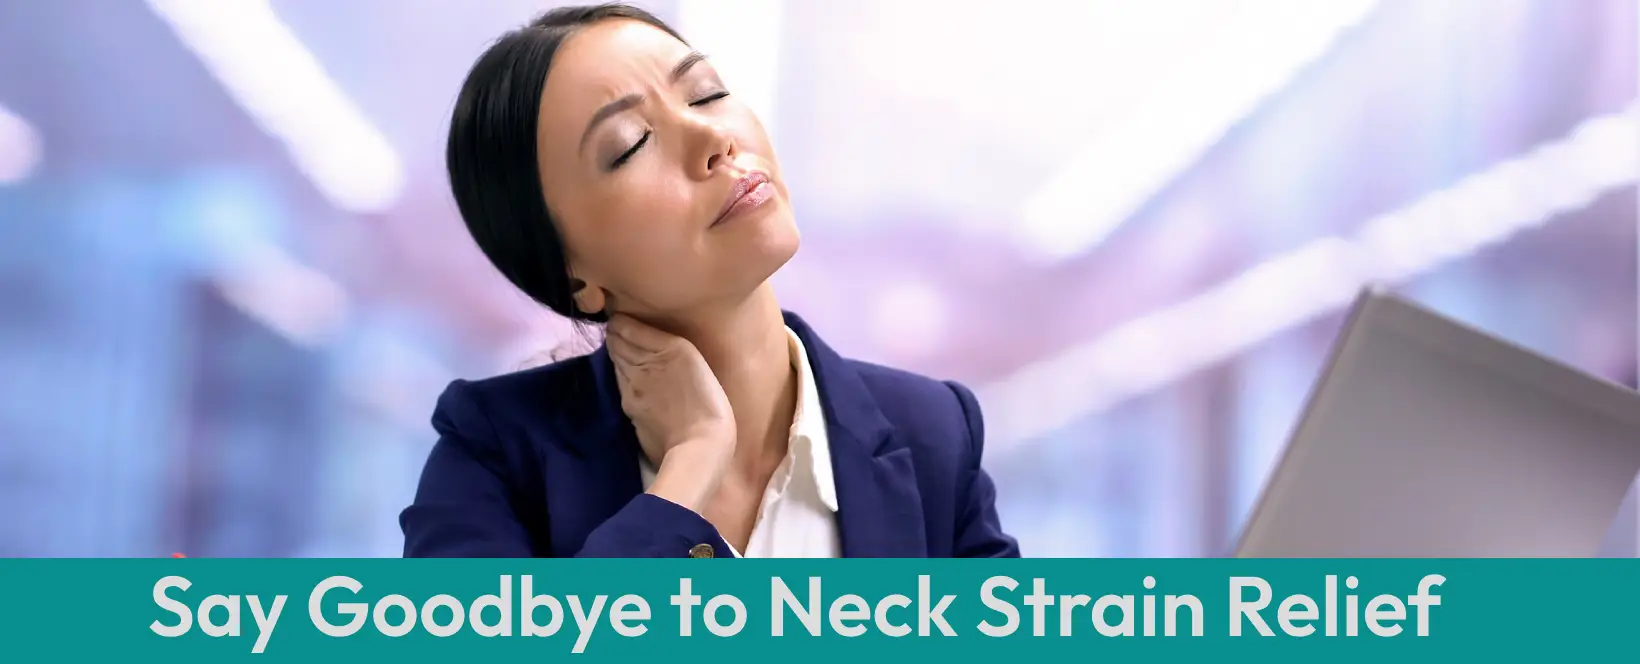 10 Useful Strategies to End Neck Strain and Provide Immediate Relief